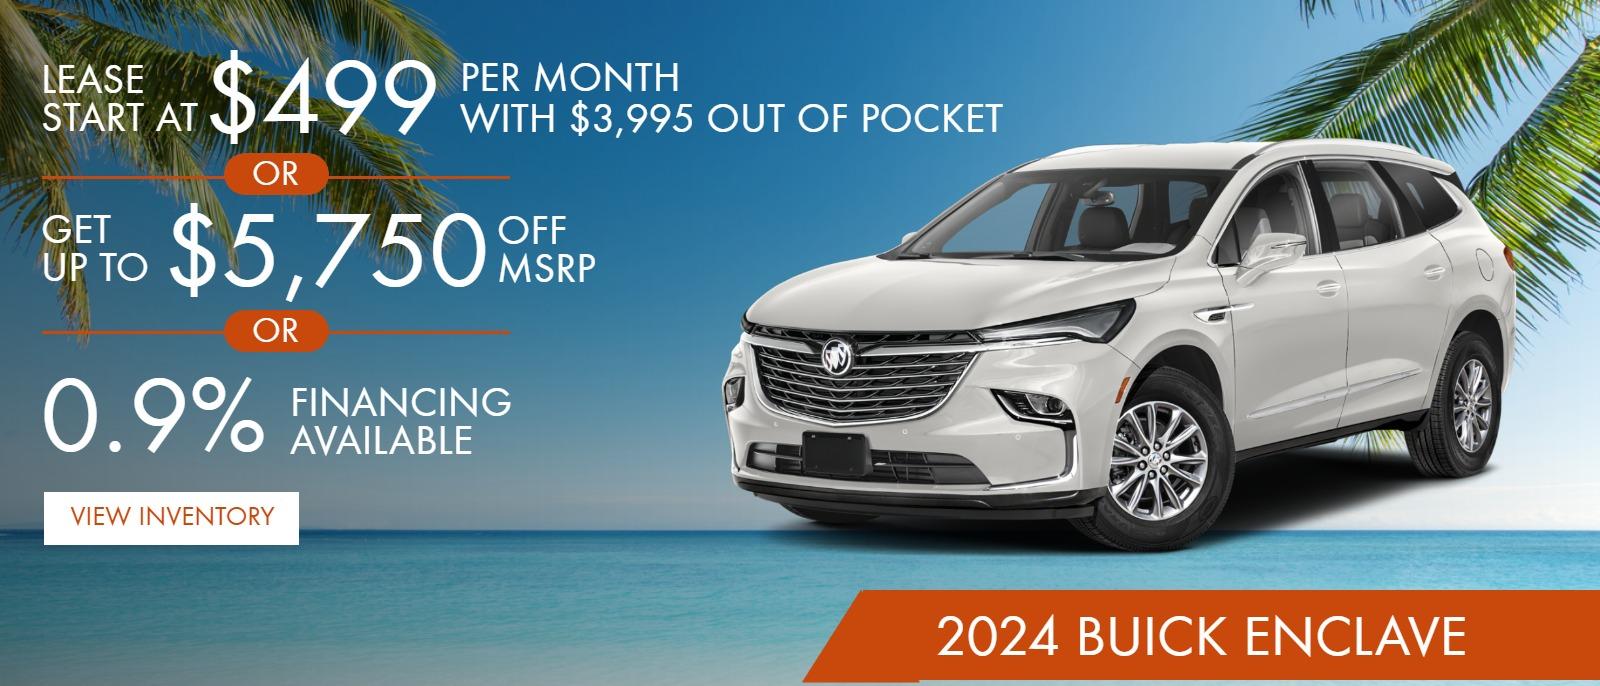 2024 Buick Enclave
Leasses Start at $499 per month with $3995 out of pocket ***
Get up to $5750 off *
0.9% Financing Available**